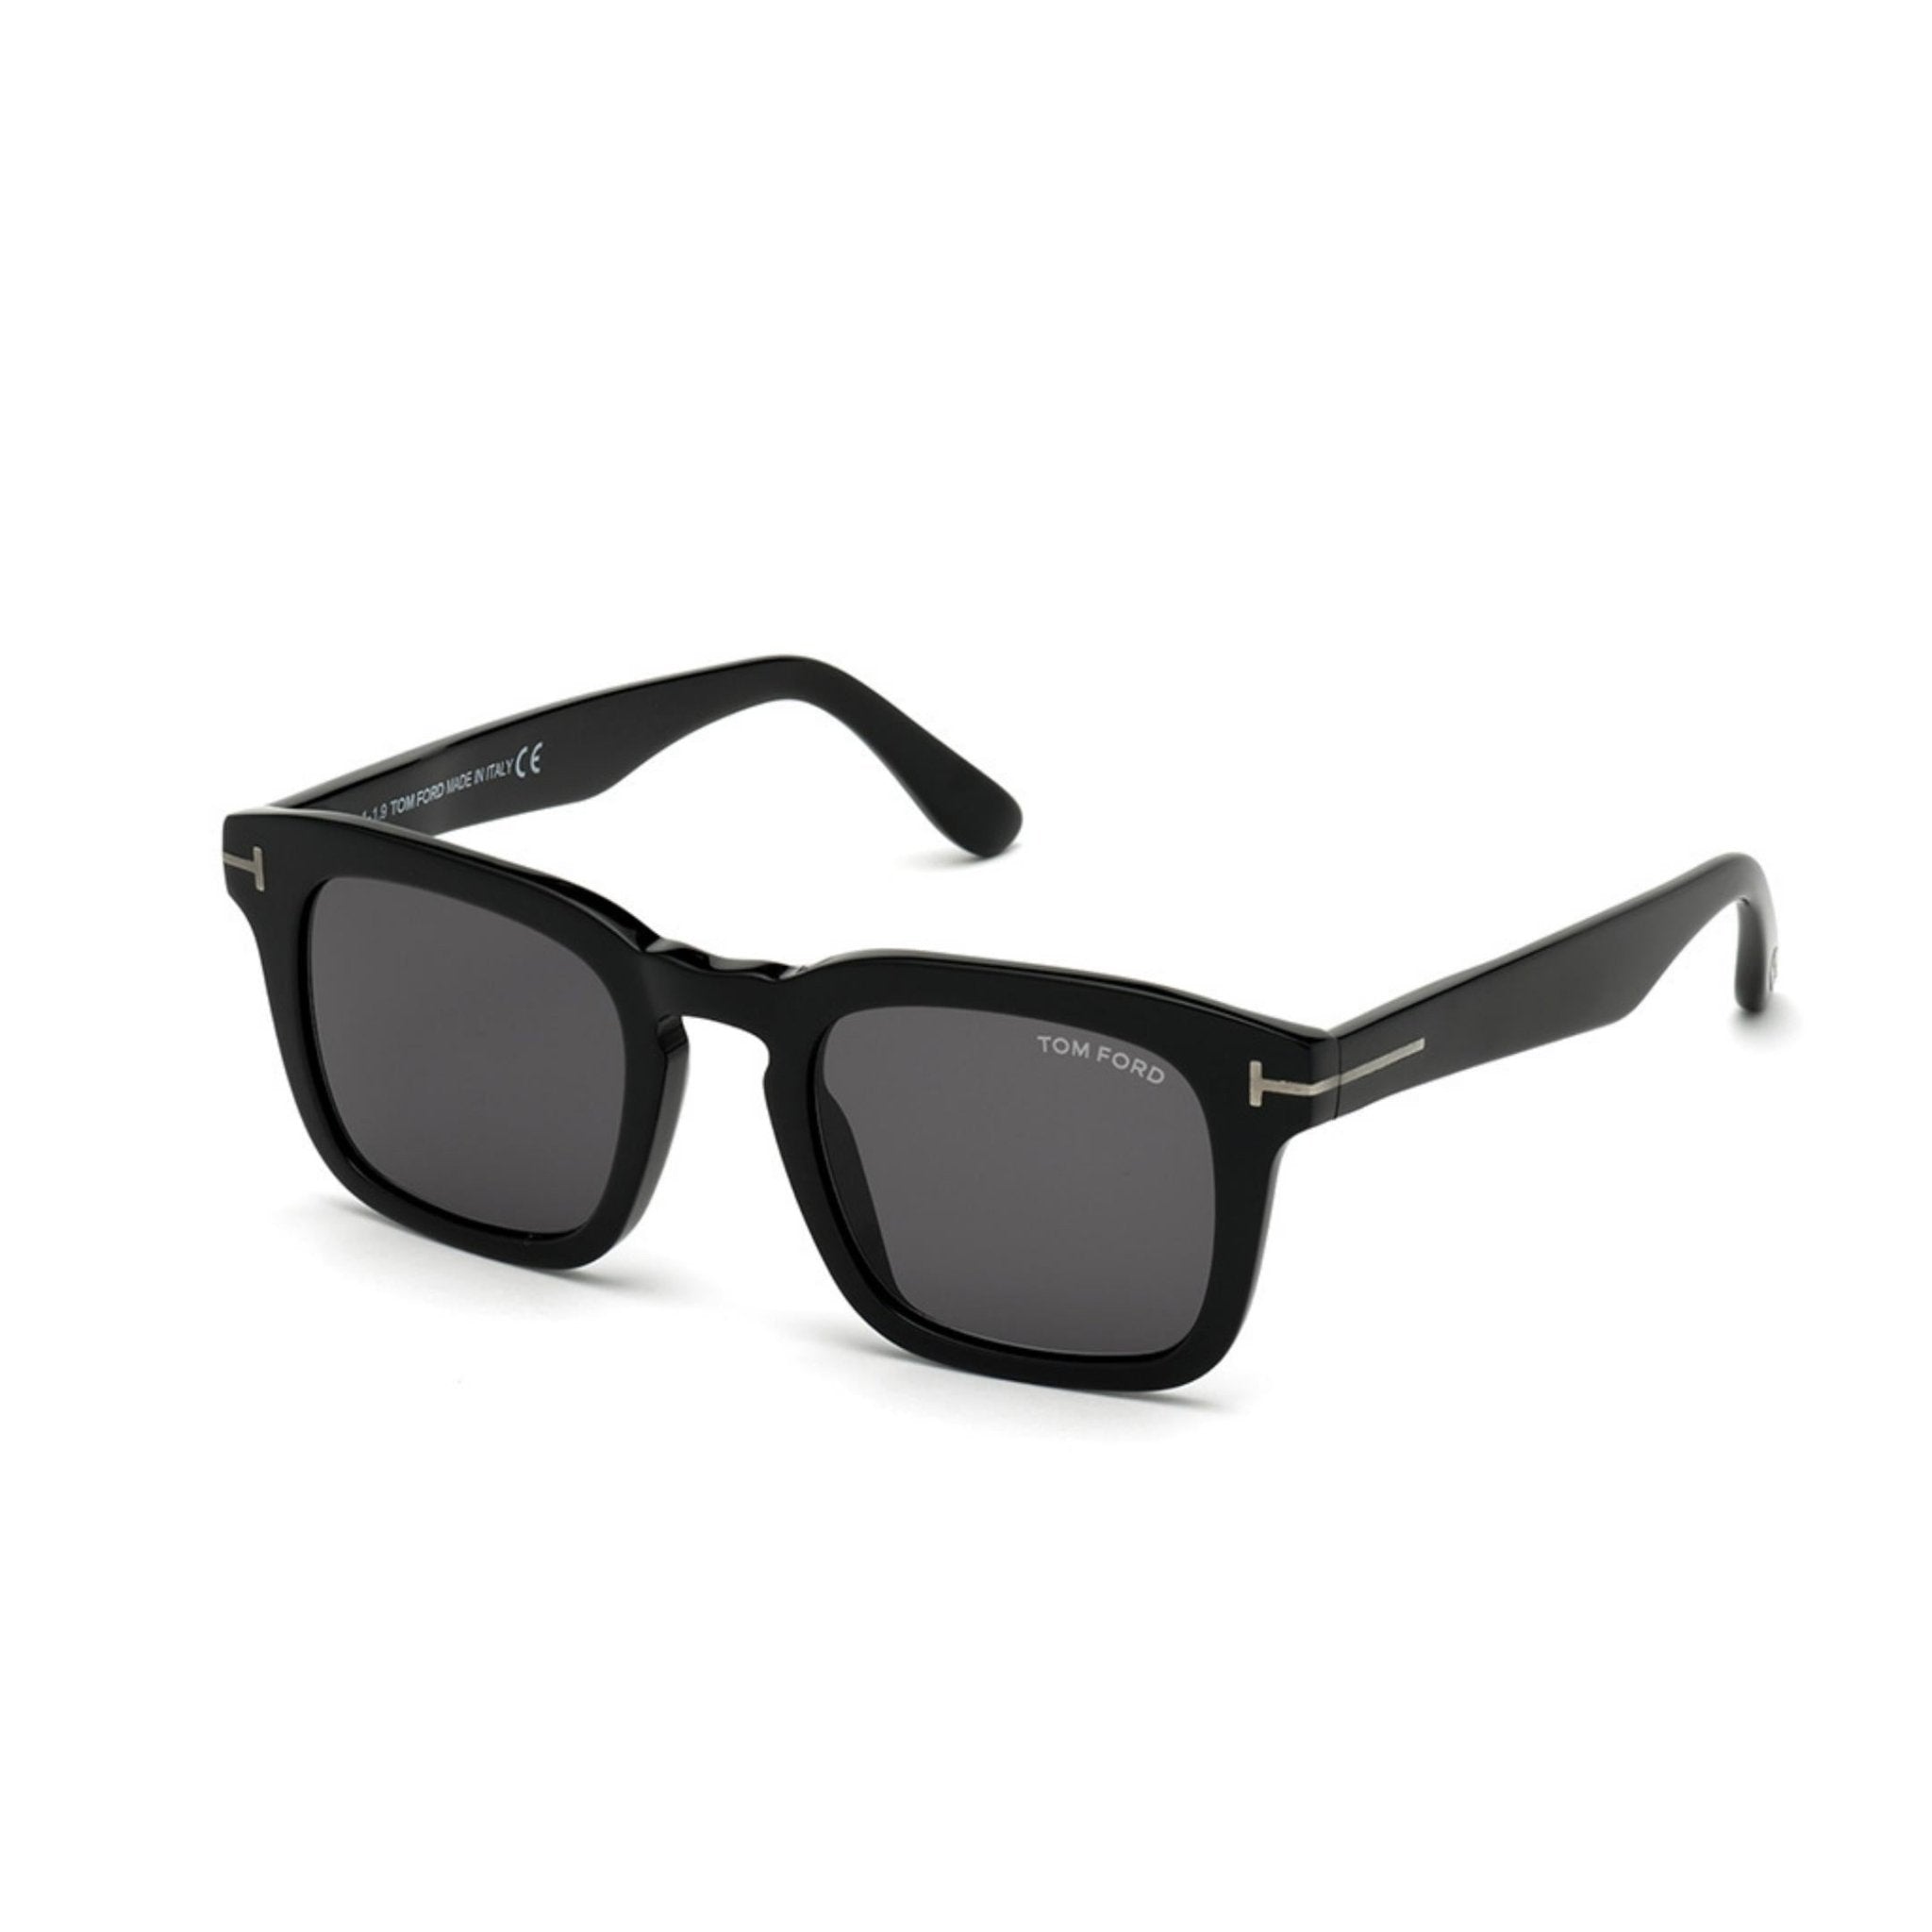 TOM FORD FT0751 5001A 01A 50/22 - Ottica Papoff shop online